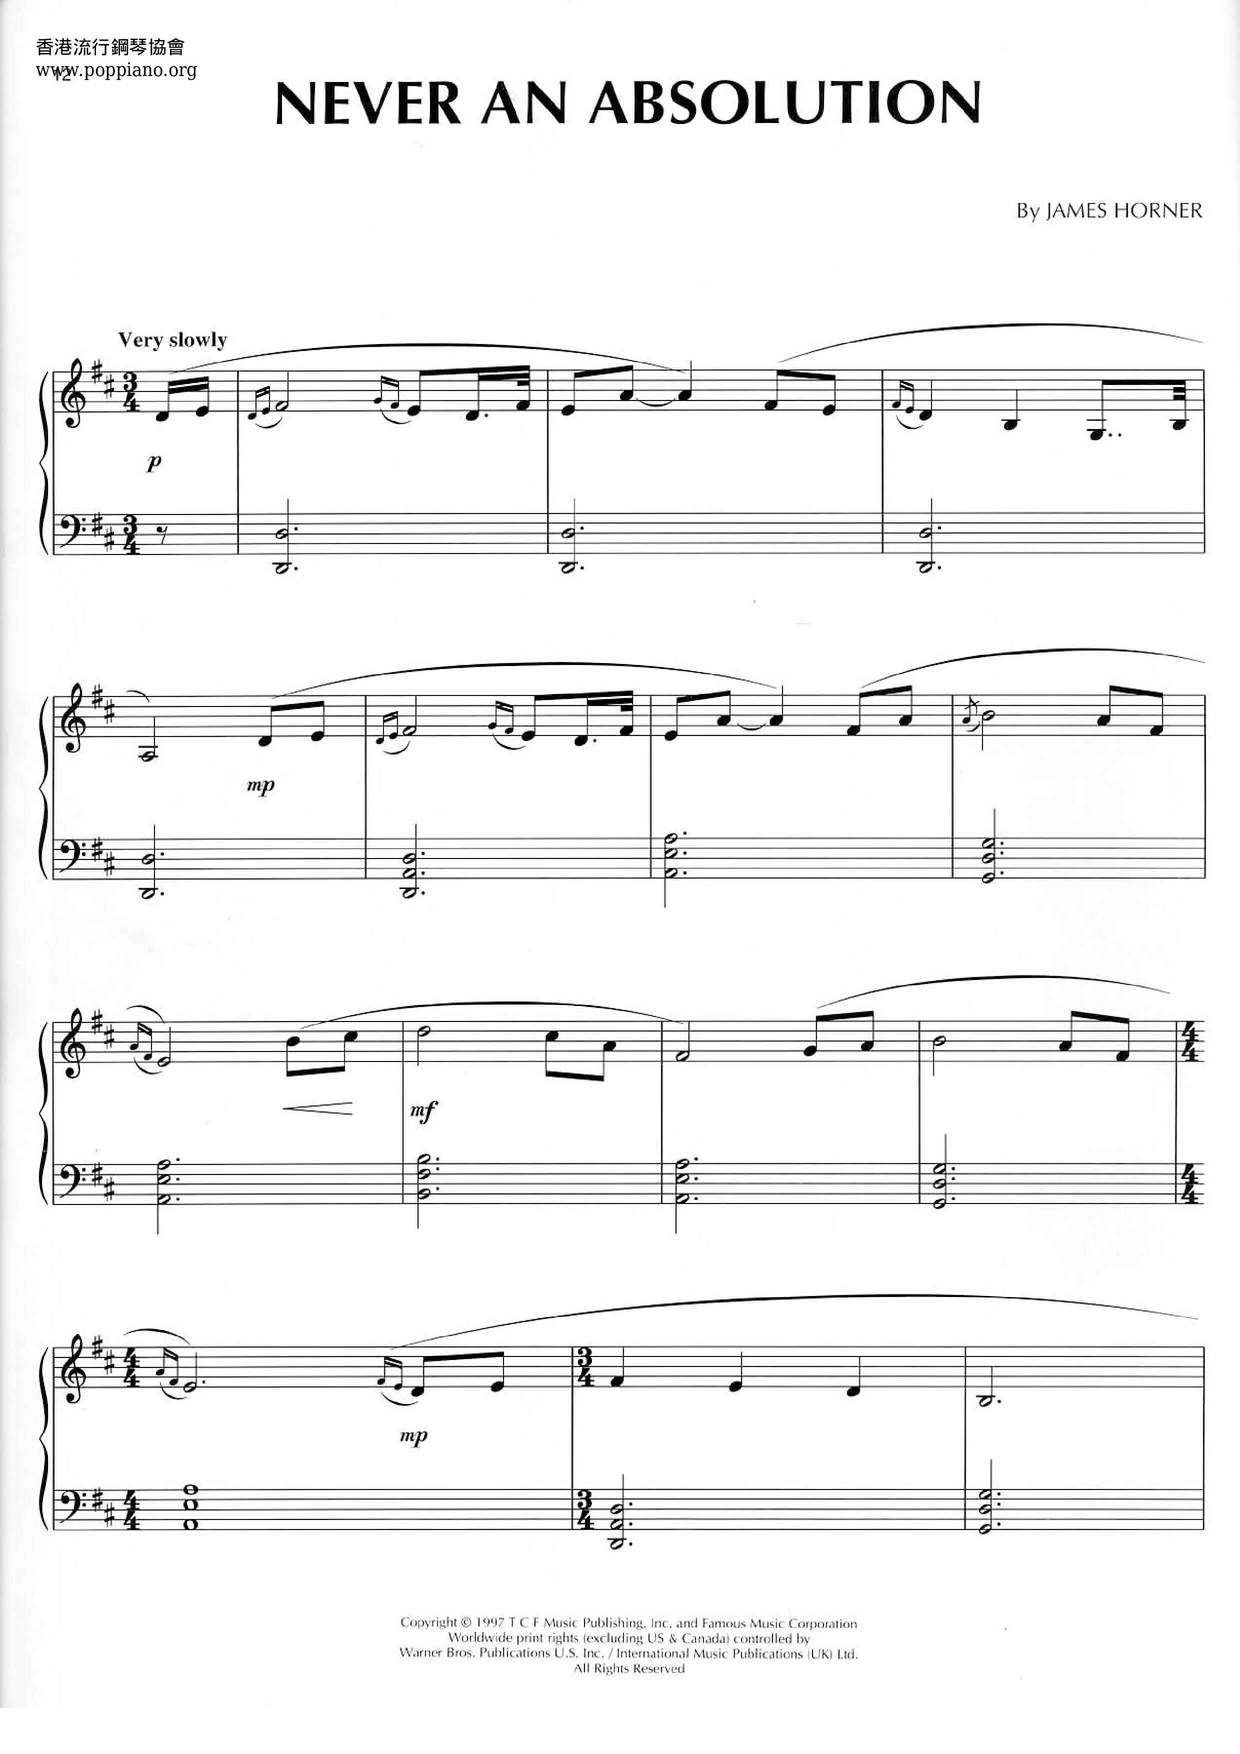 Titanic Songbook 44 Pages琴谱